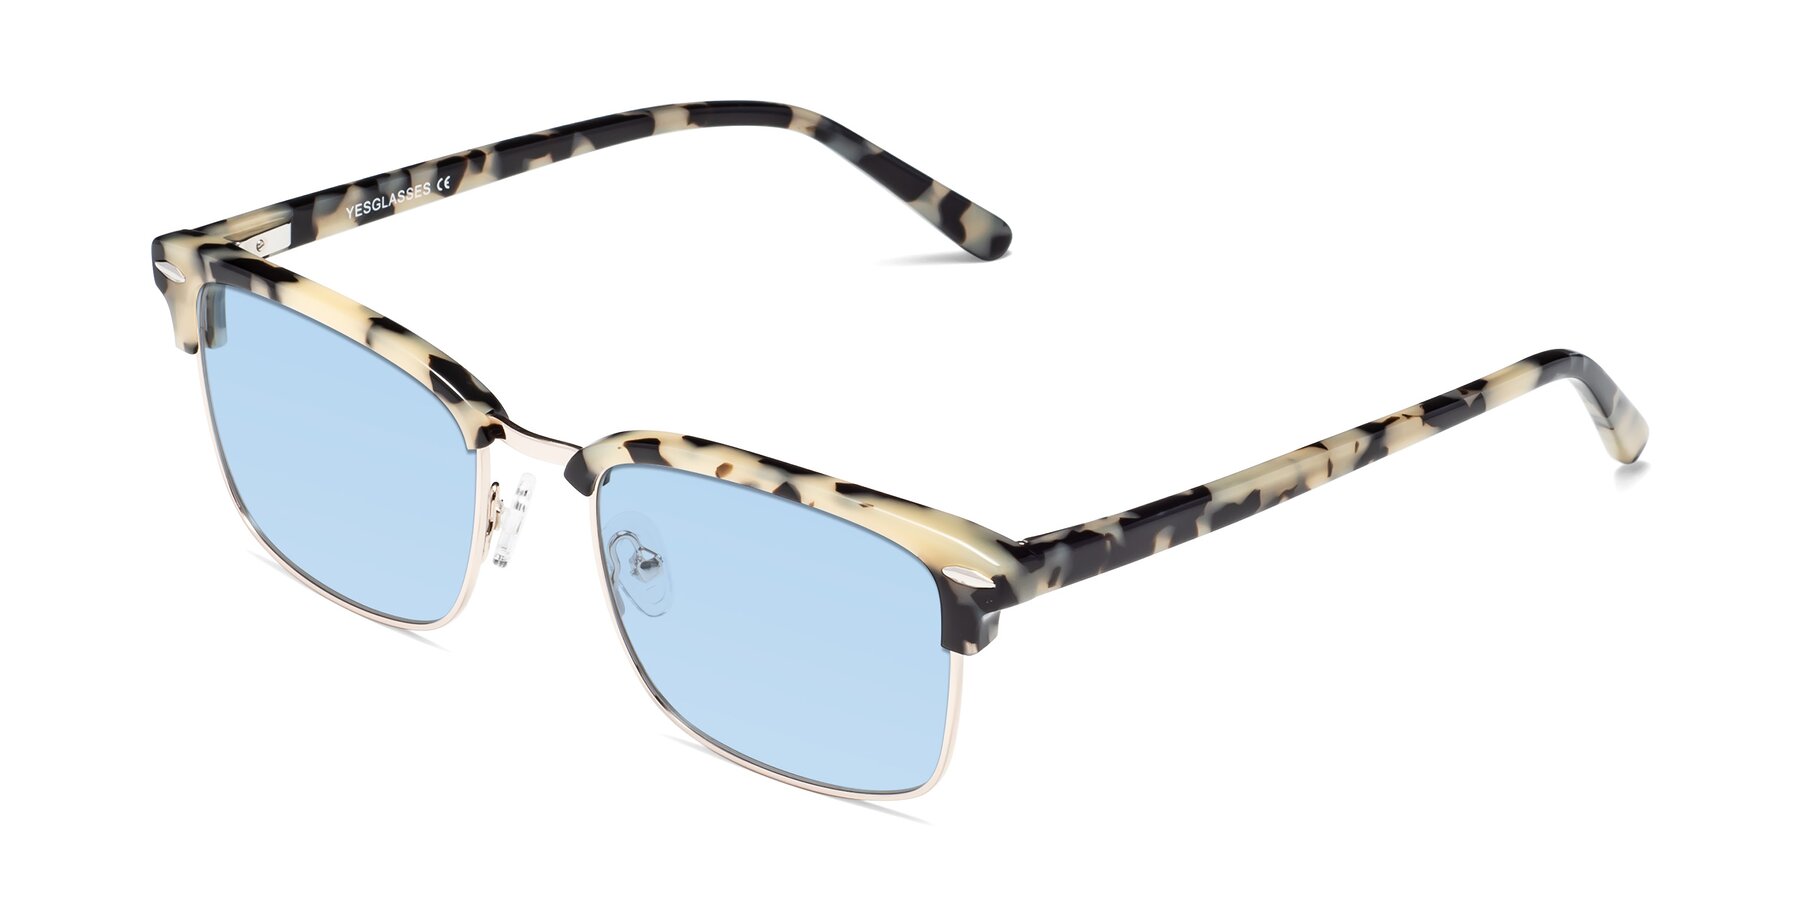 Angle of 17464 in Tortoise-Gold with Light Blue Tinted Lenses